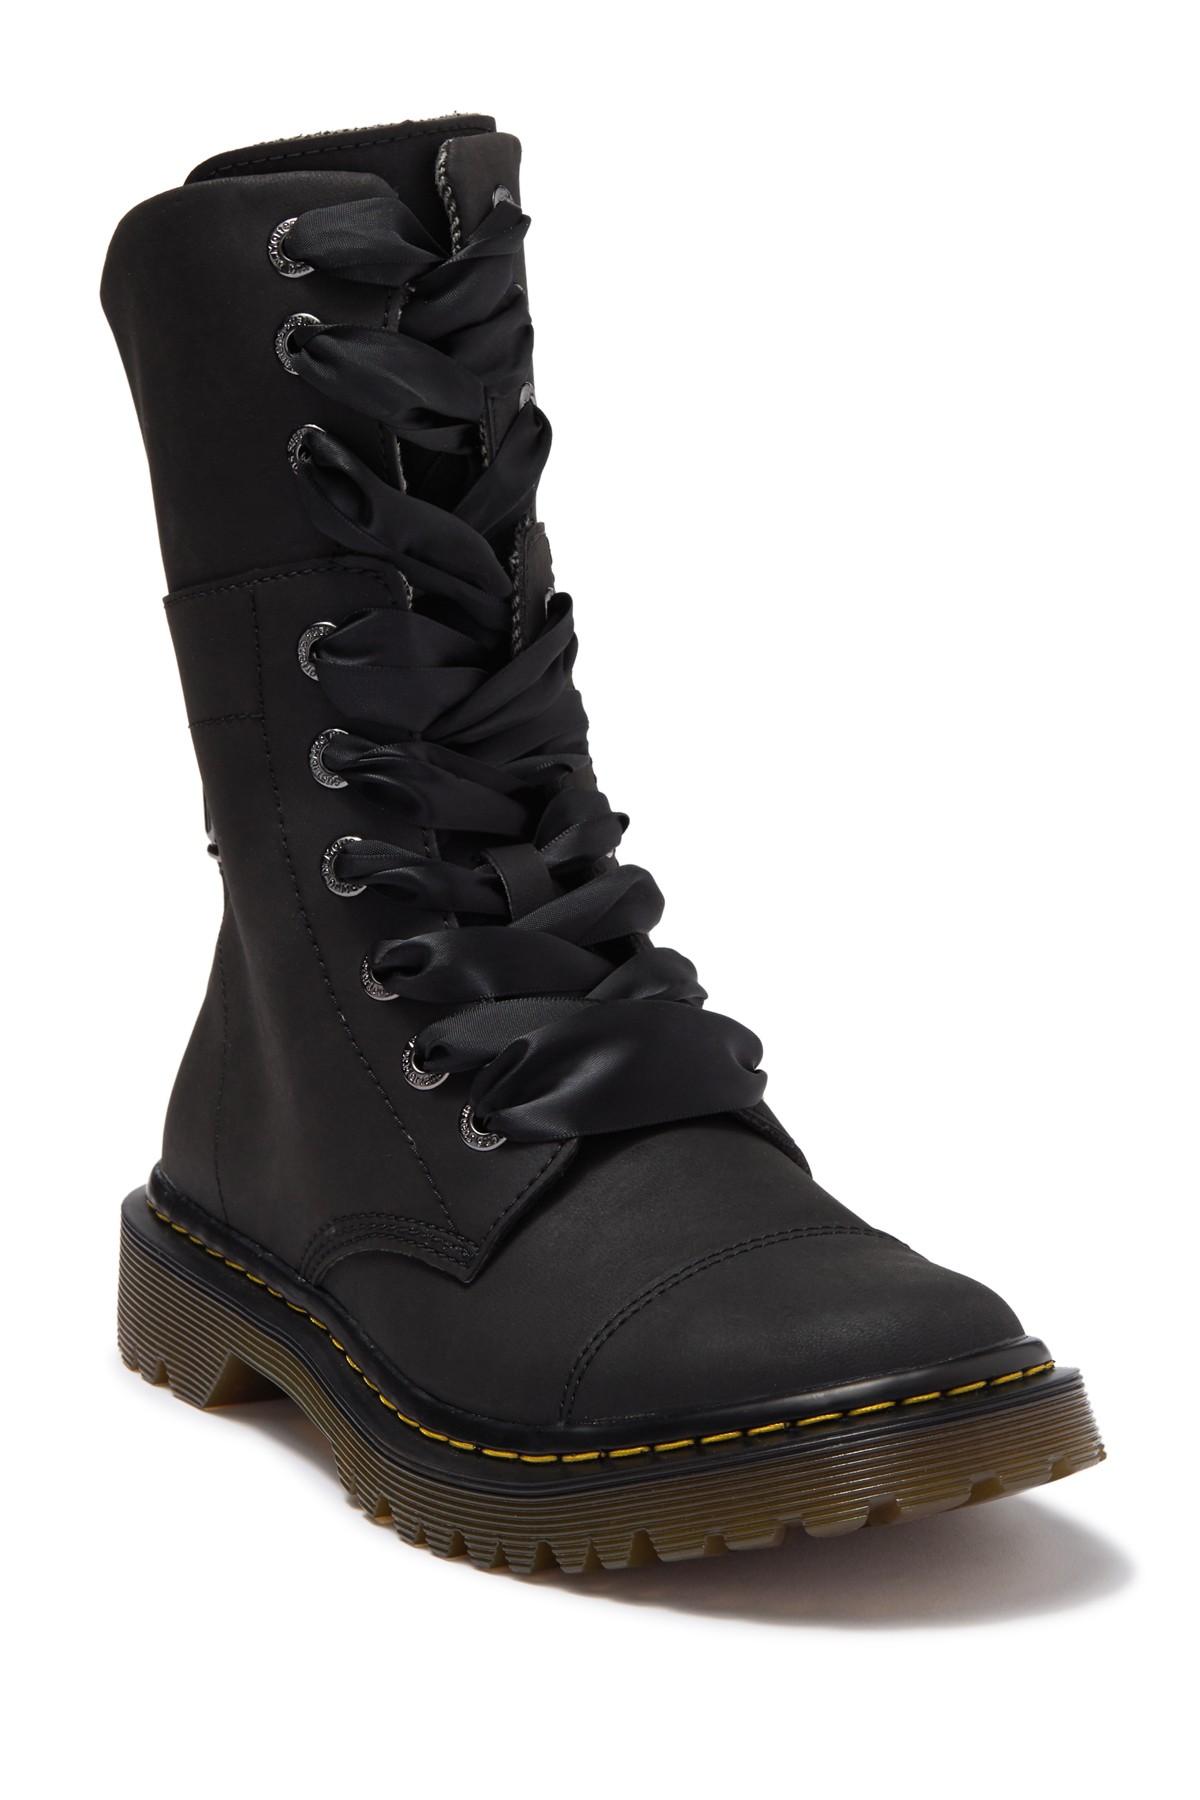 Dr. Martens Yuba Ribbon Lace-up Boot in Black | Lyst